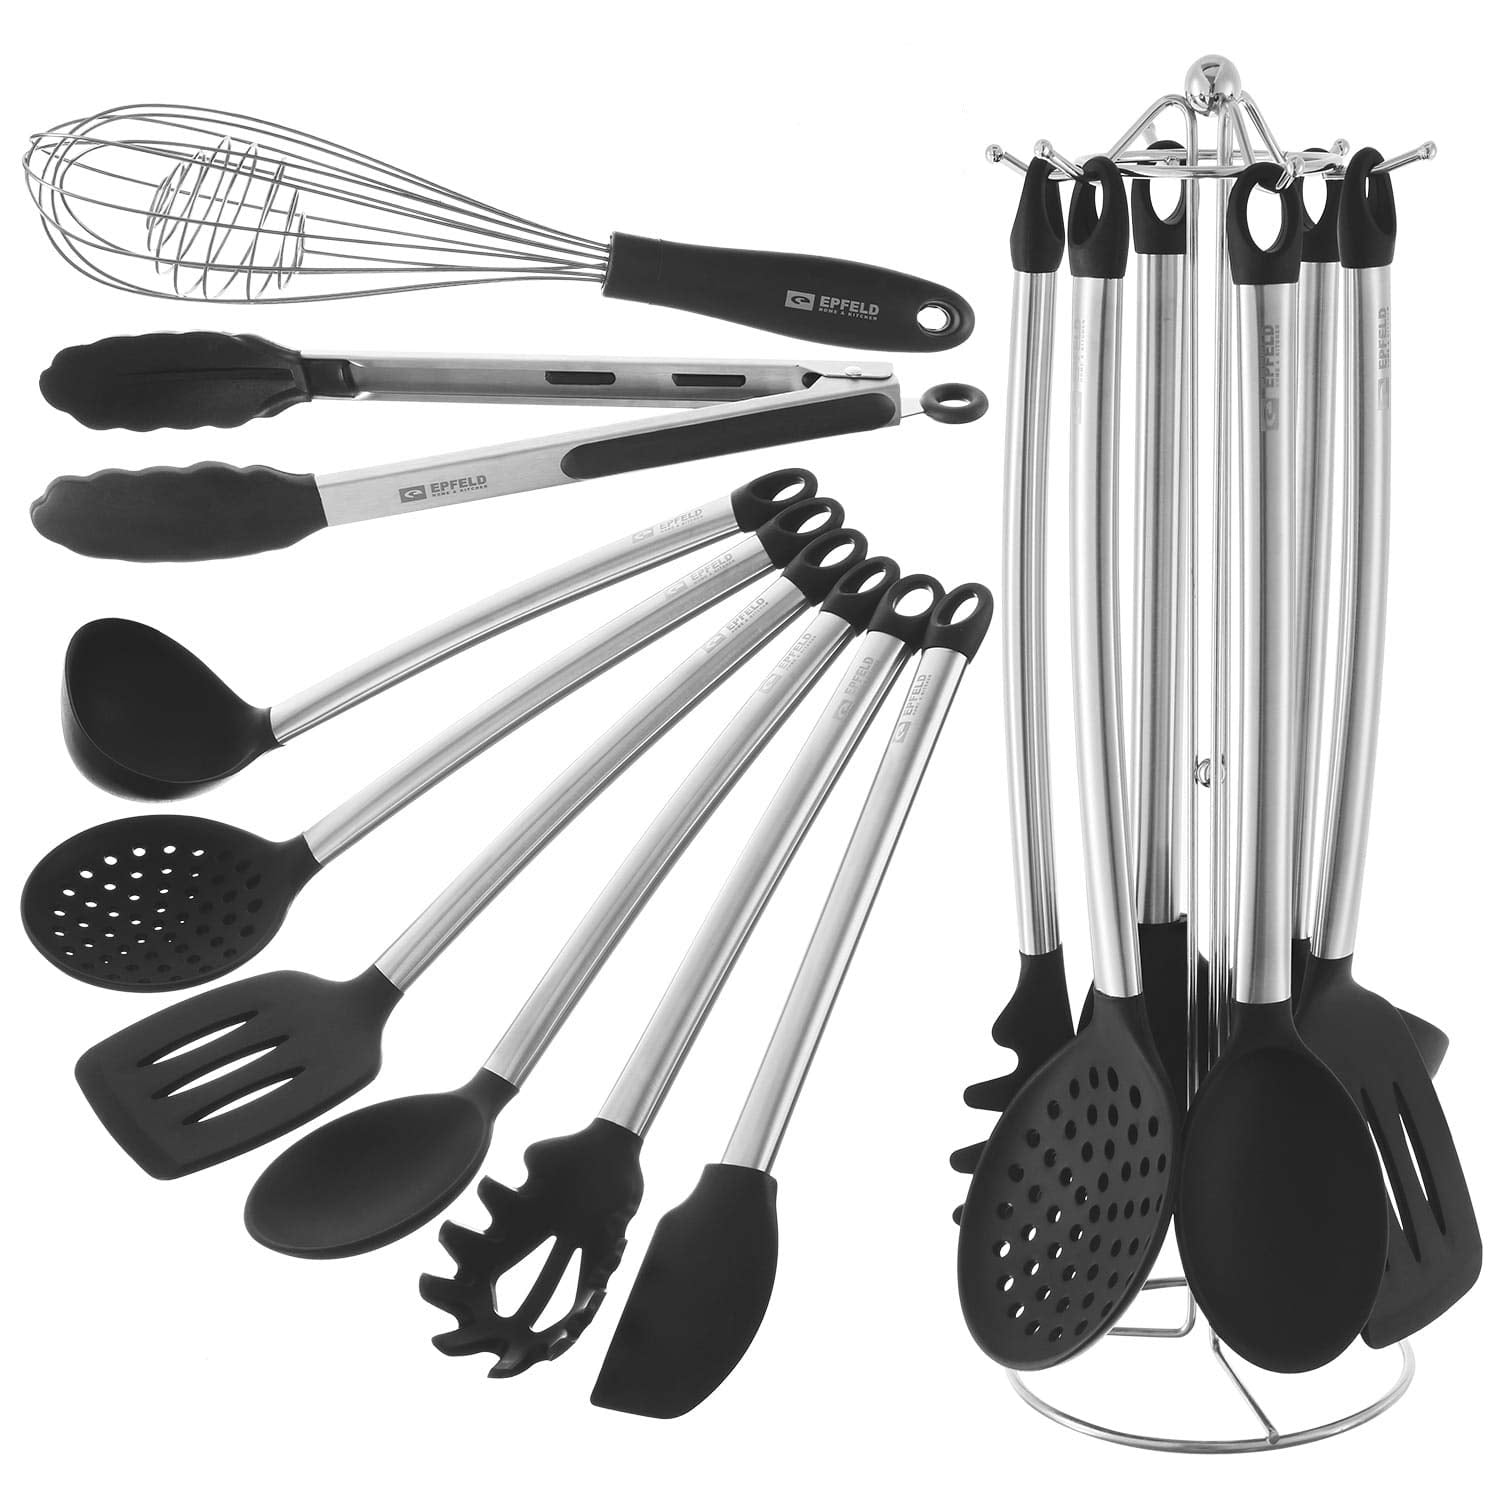 Kitchen Utensil Set With Holder - 8 Piece Silicone, Non-Stick, Cooking Utensils Set With Stainless Steel Stand - Serving Tongs, Spoon, Spatula Tools, Pasta Server, Ladle, Strainer, Whisk, Holder